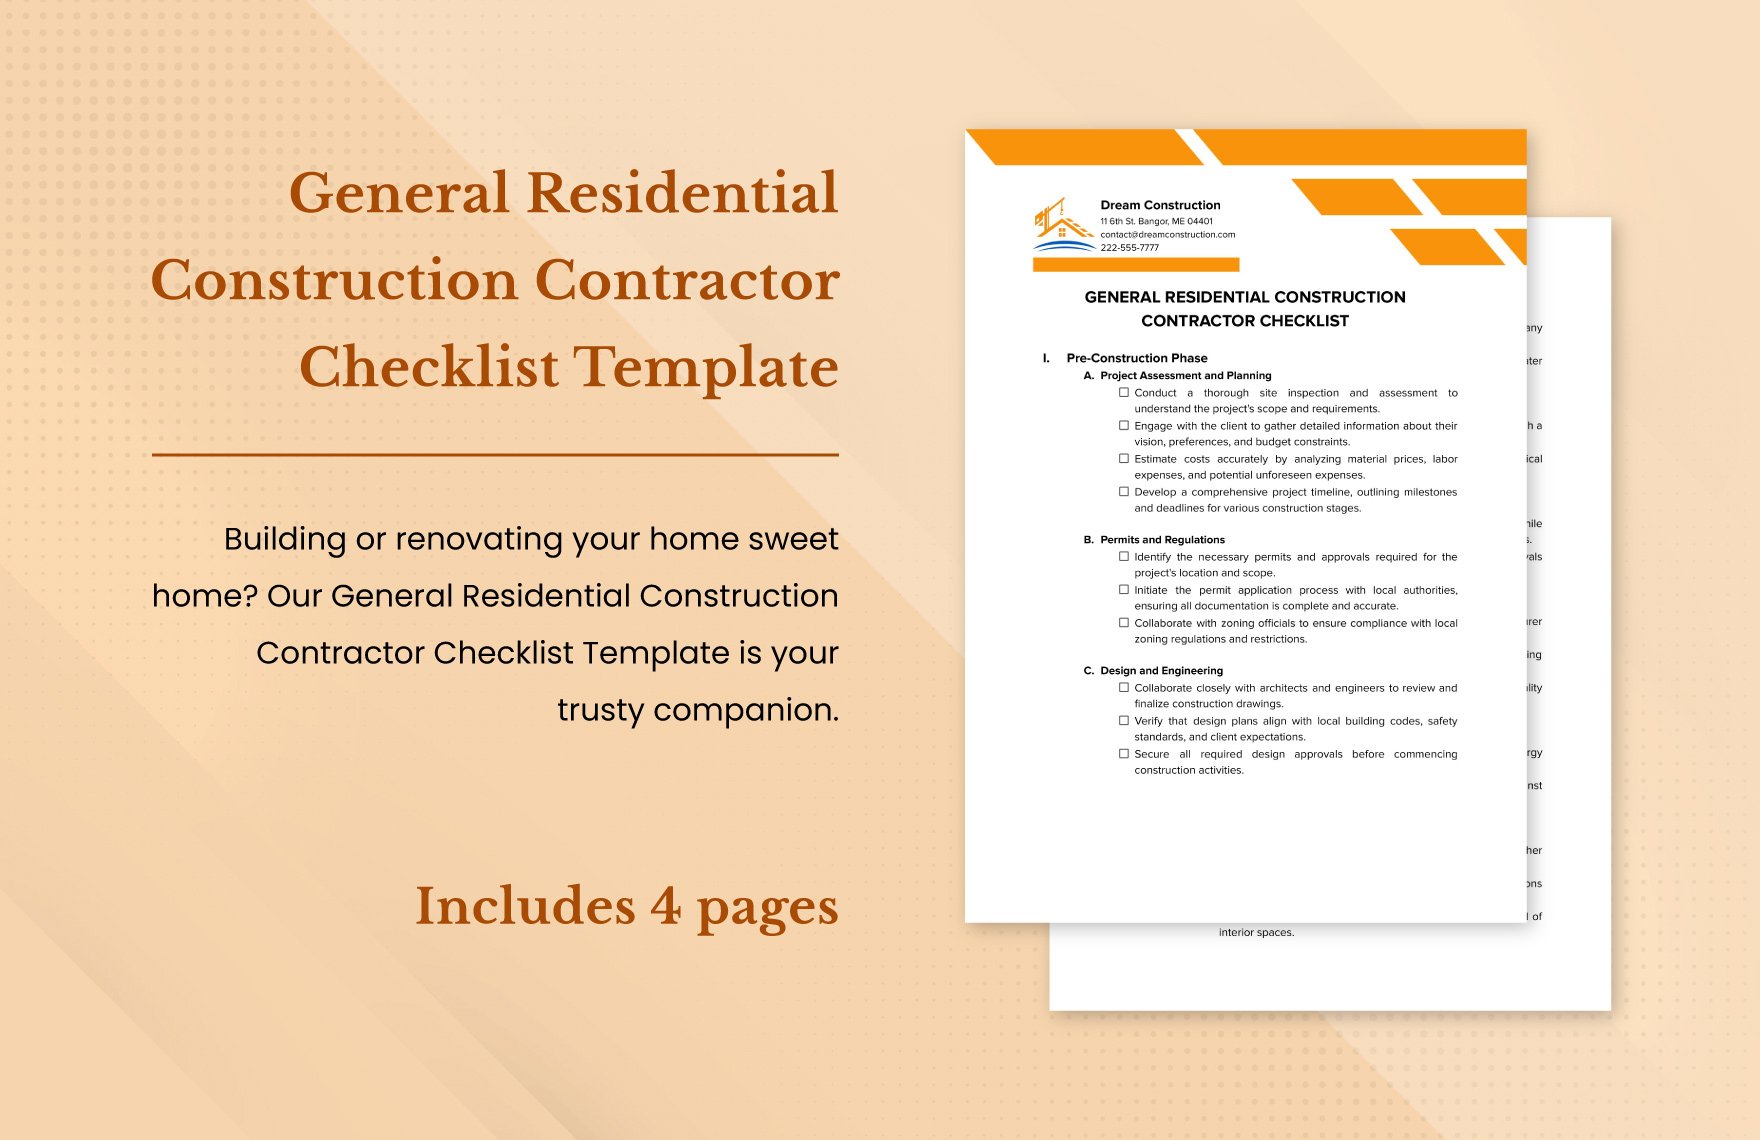 General Residential Construction Contractor Checklist Template